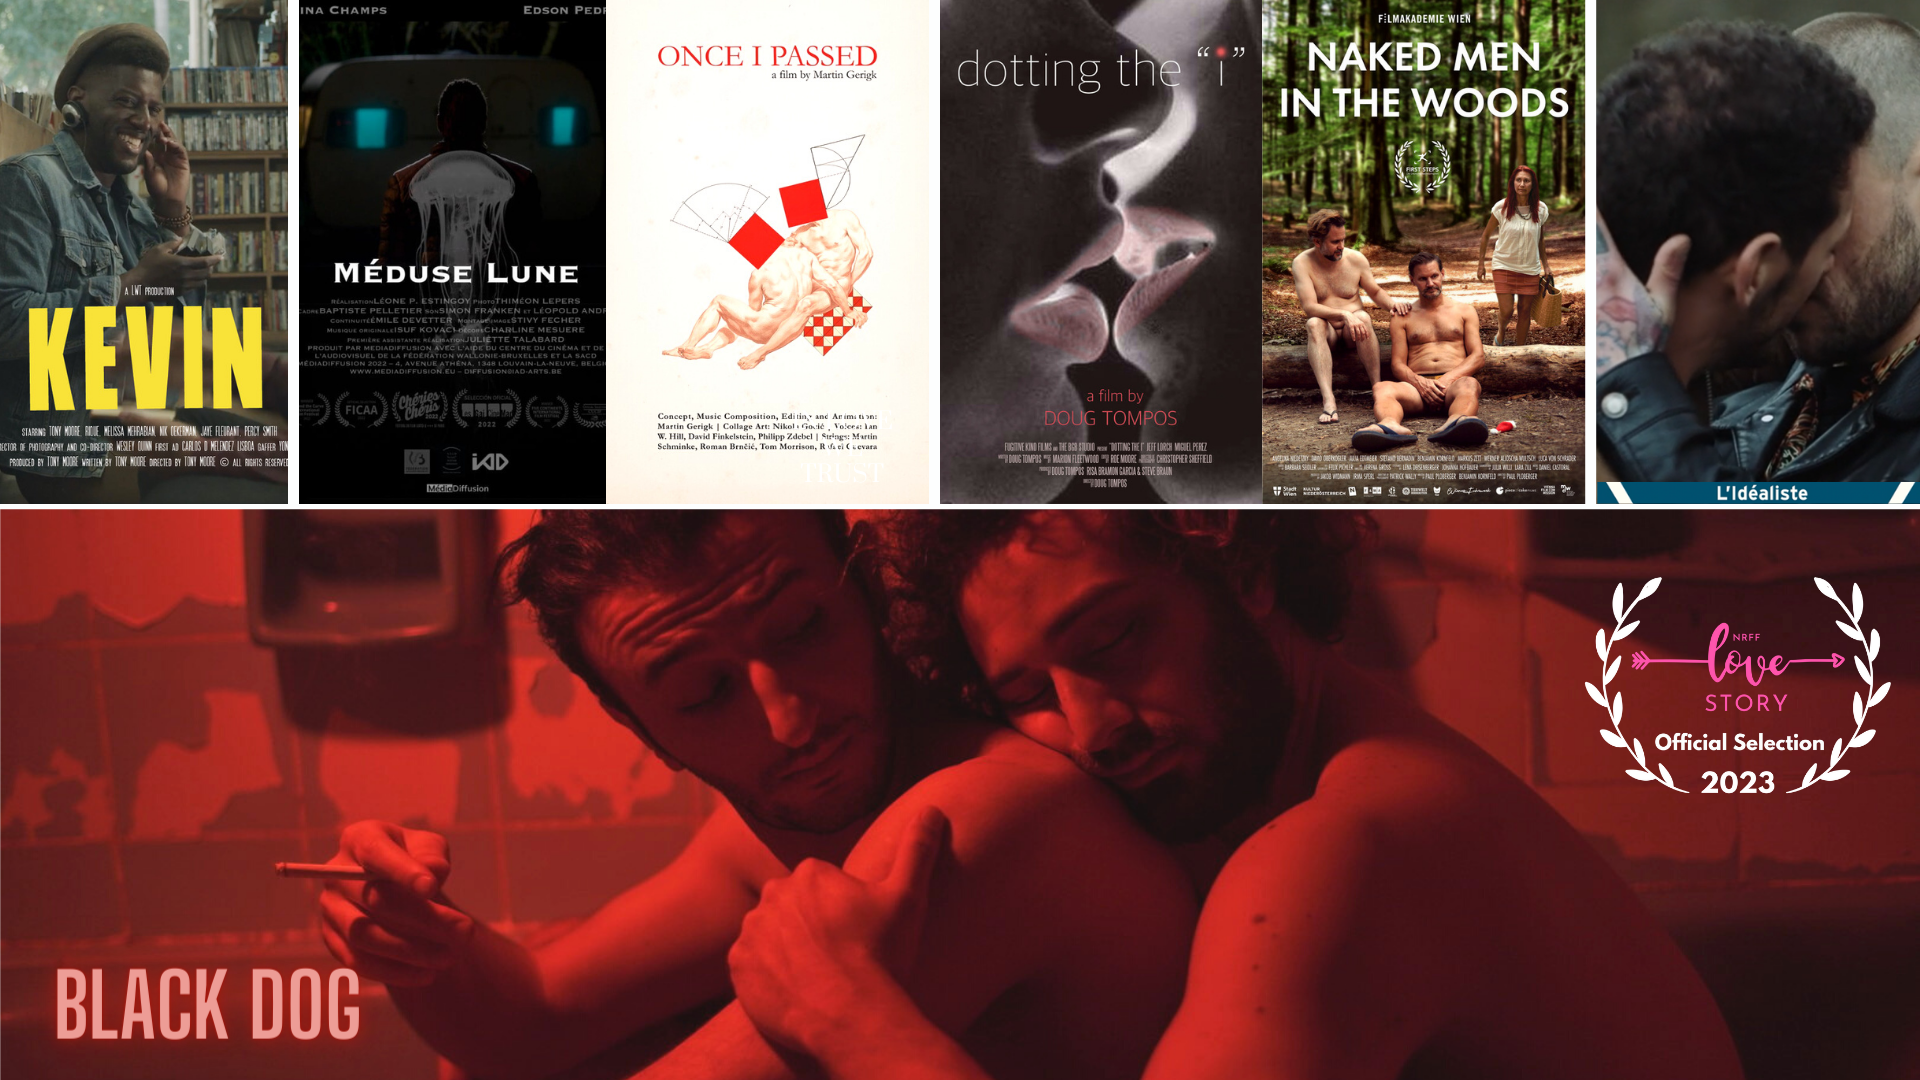 akira go recommends naked art on vimeo pic